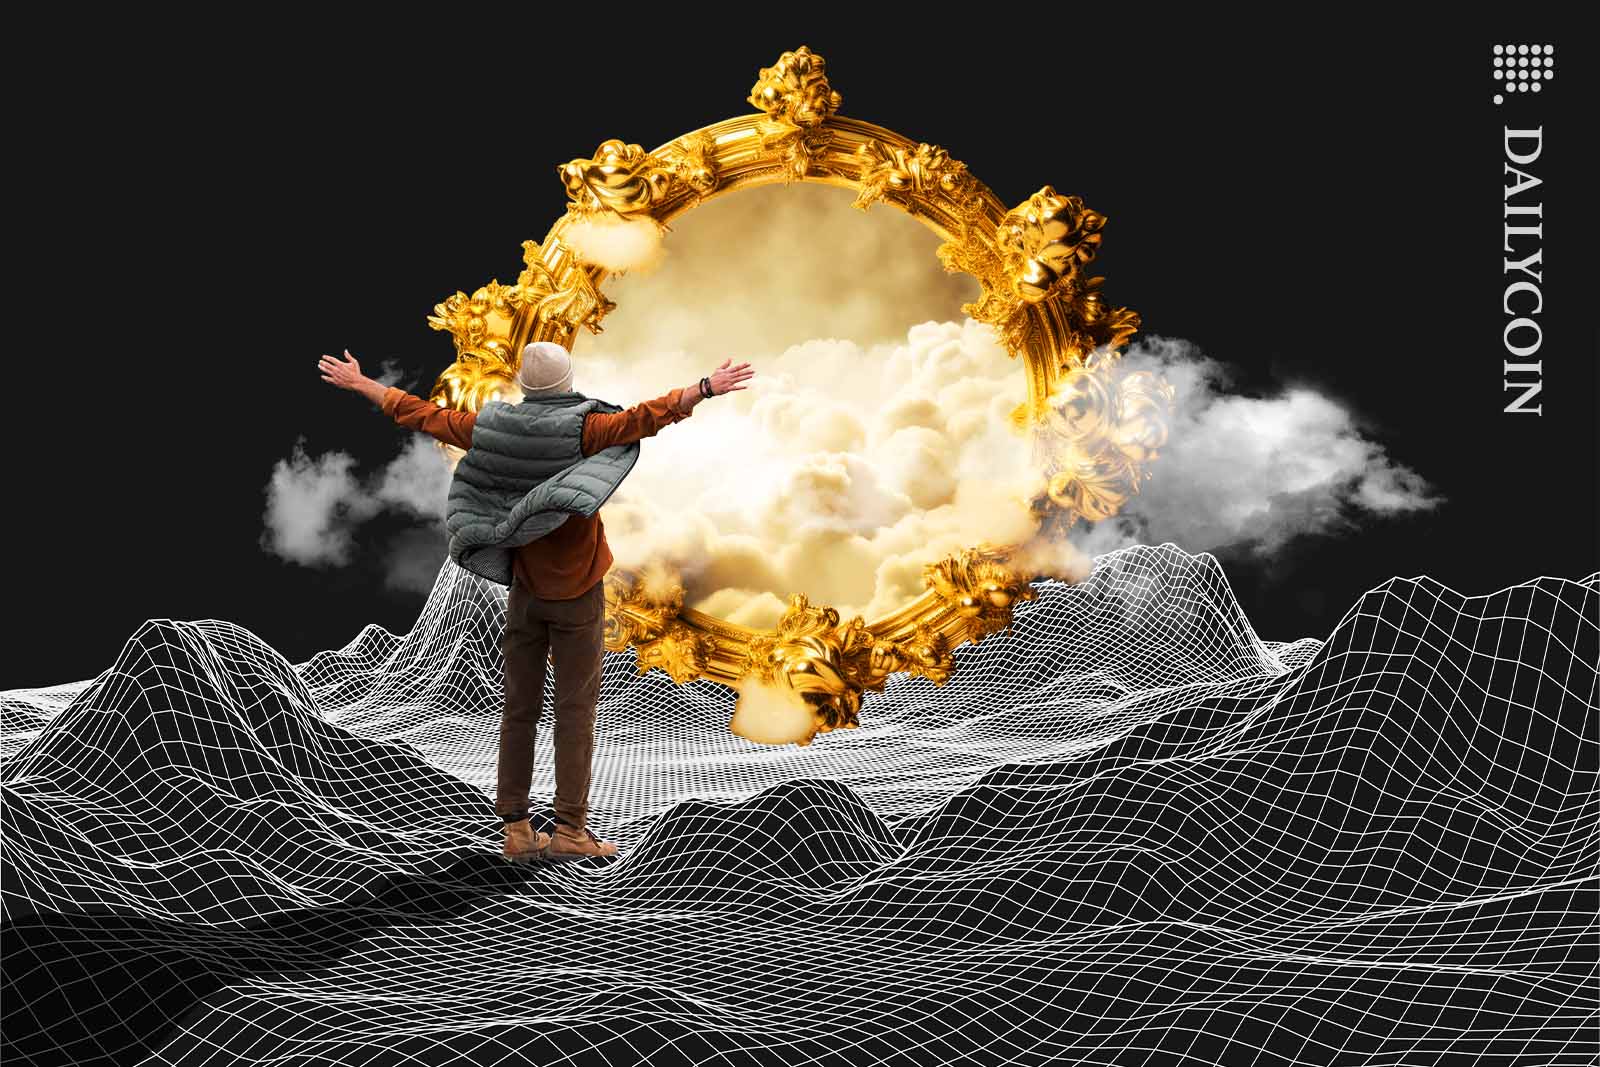 Man found a golden portal in the middle of a wireframe landscape.